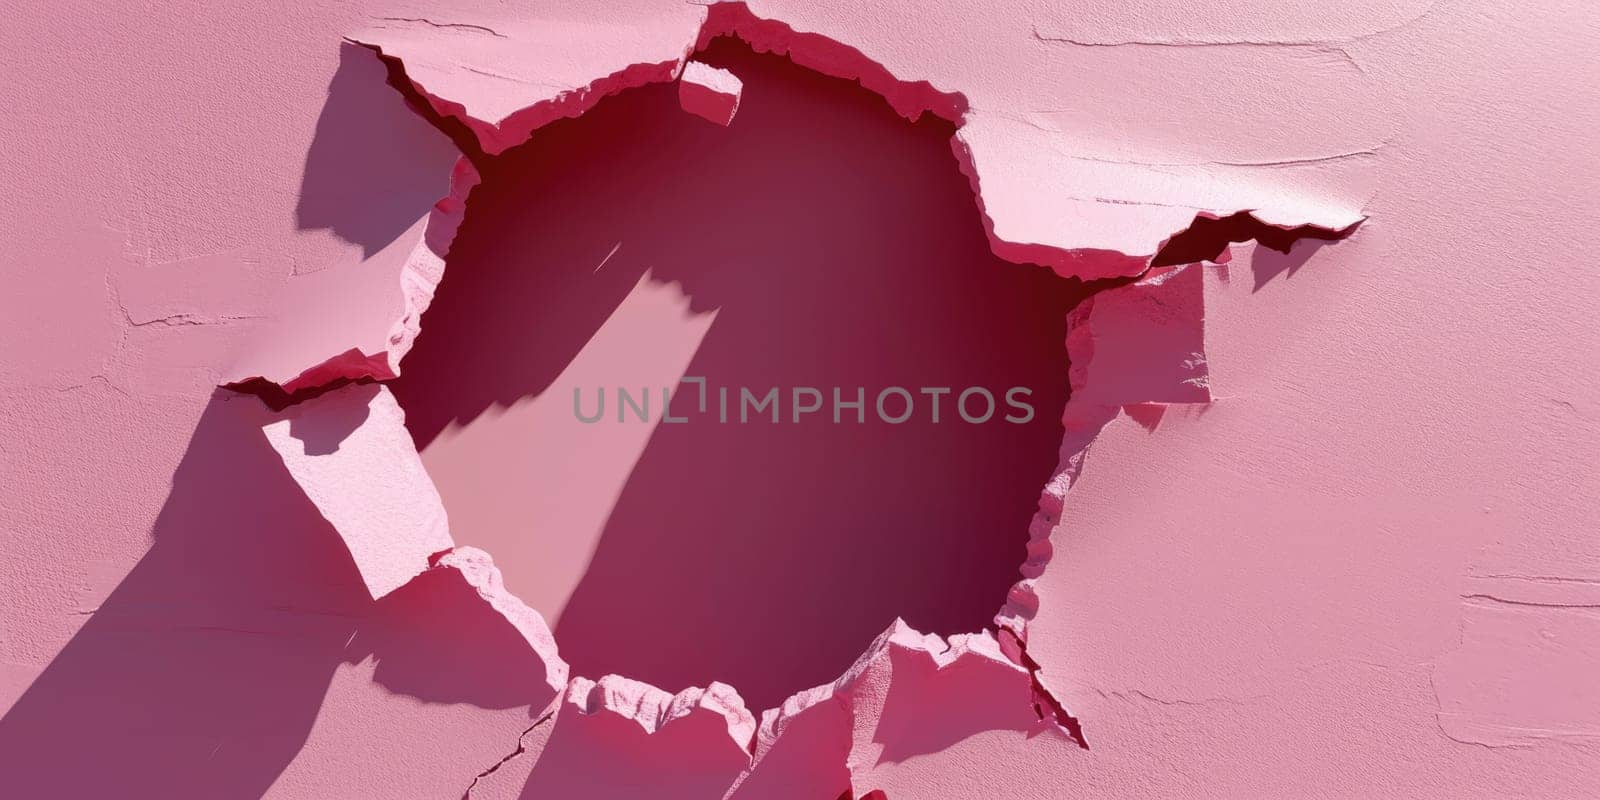 Zoom in picture of breaking pink wall and the hollow cracking pink hole. AIGX03. by biancoblue